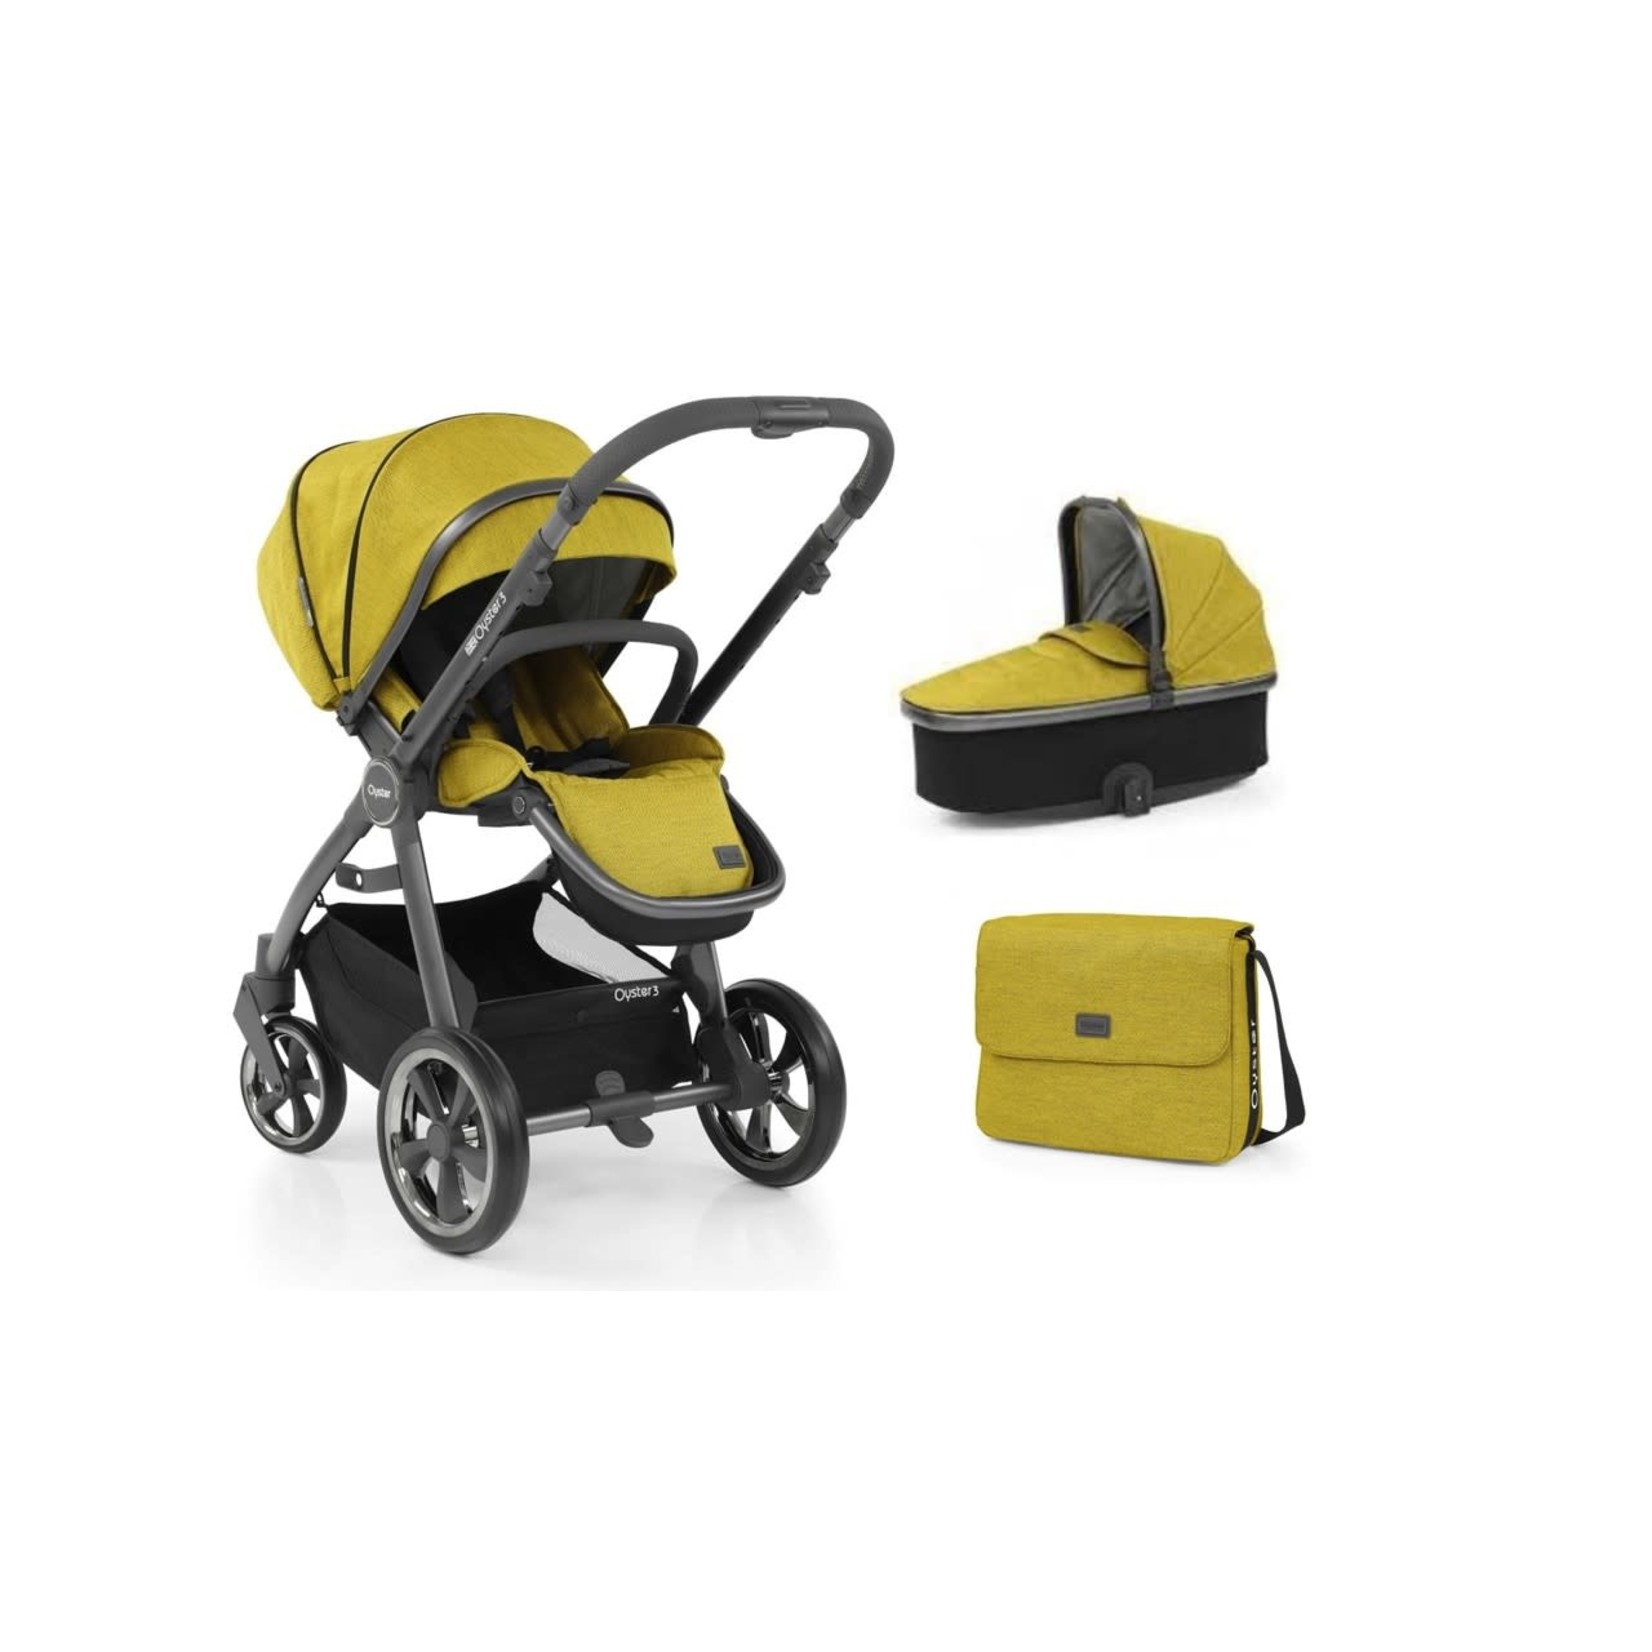 OYSTER BABYSTYLE OYSTER 3 (2 IN 1) CARRY COT TRAVEL SYSTEM - MUSTARD